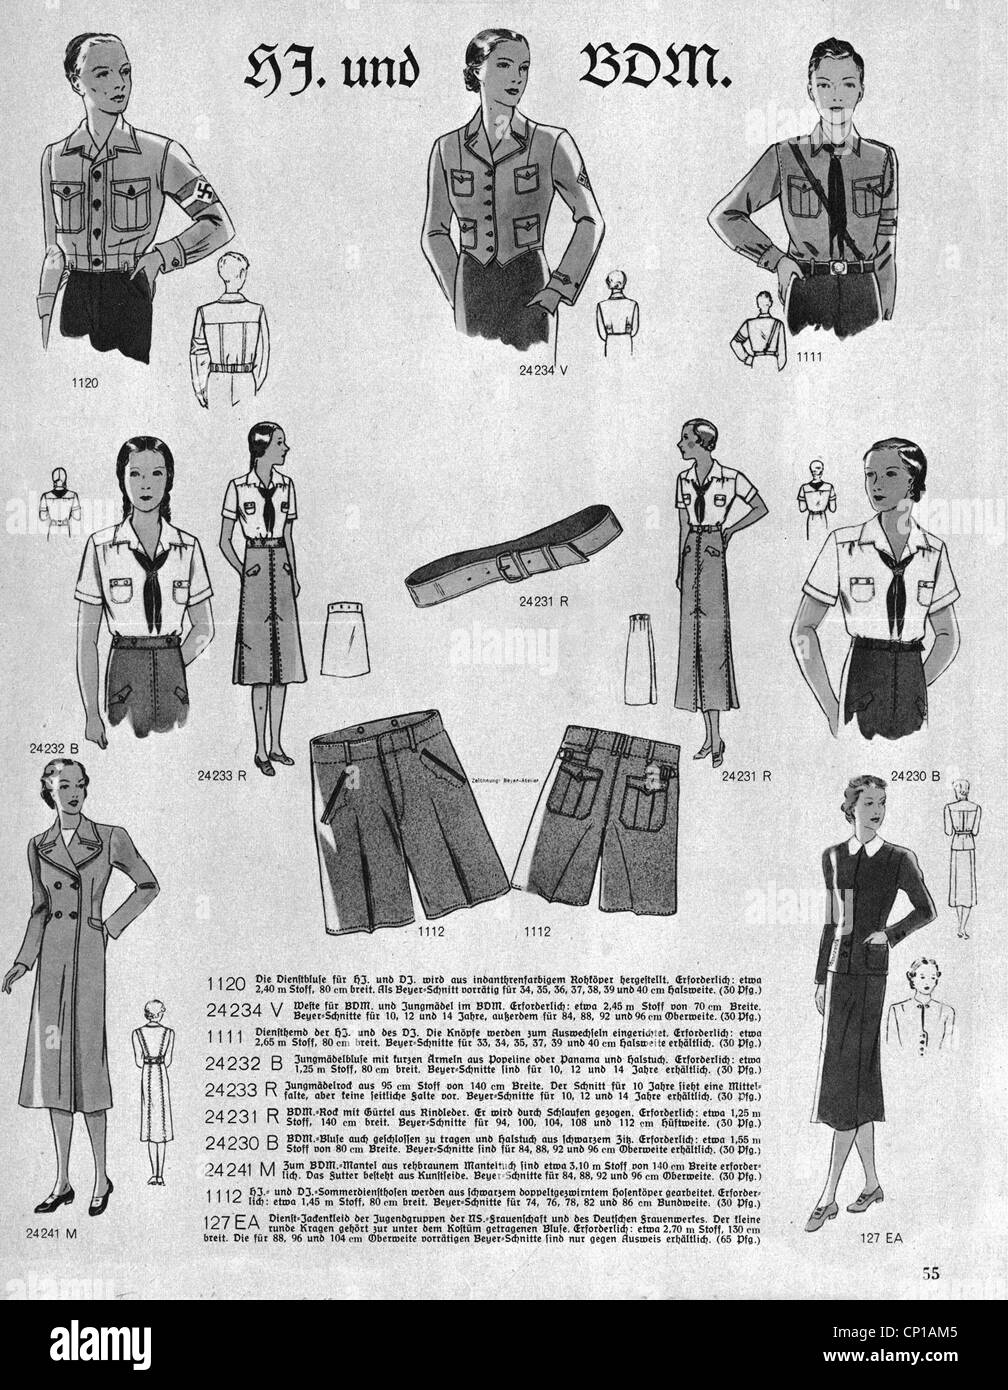 National Socialism / Nazism, organization, Hitler Youth, uniforms of the Hitler Youth and the League of German Girls, do-it-yourself sewing instruction, from 'Frauen-Warte', July 1939, Additional-Rights-Clearences-Not Available Stock Photo